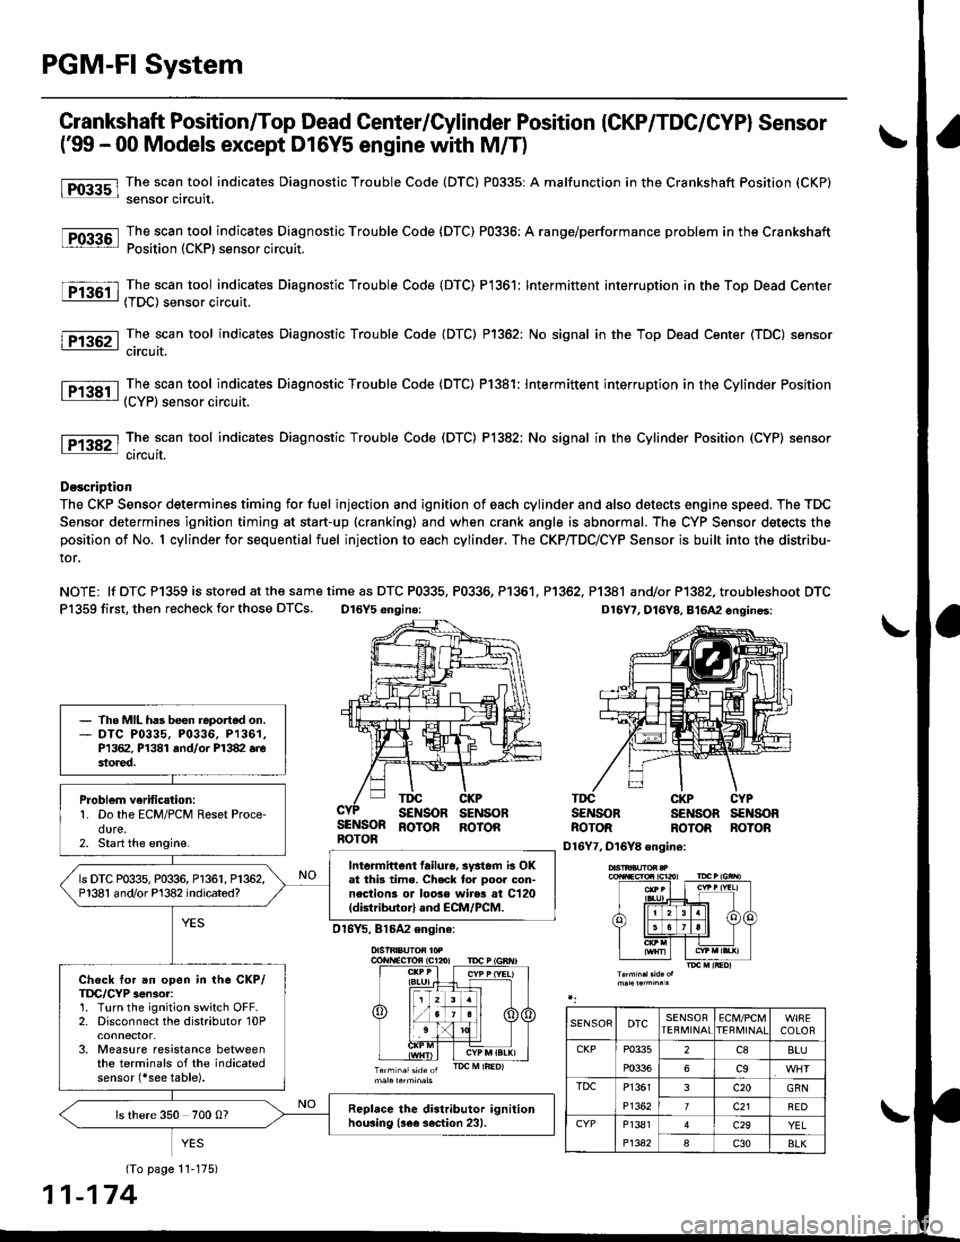 HONDA CIVIC 1999 6.G Owners Manual PGM-FI System
l-Fos3sl
tFos36l
tF1361 l
Fr362-1
tF13sil
Crankshaft Position/Top Dead Center/Cylinder Position (CKP/TDC/CYPI Sensor
f99 - 00 Models except D16Y5 engine with M/T)
The scan tool indicates